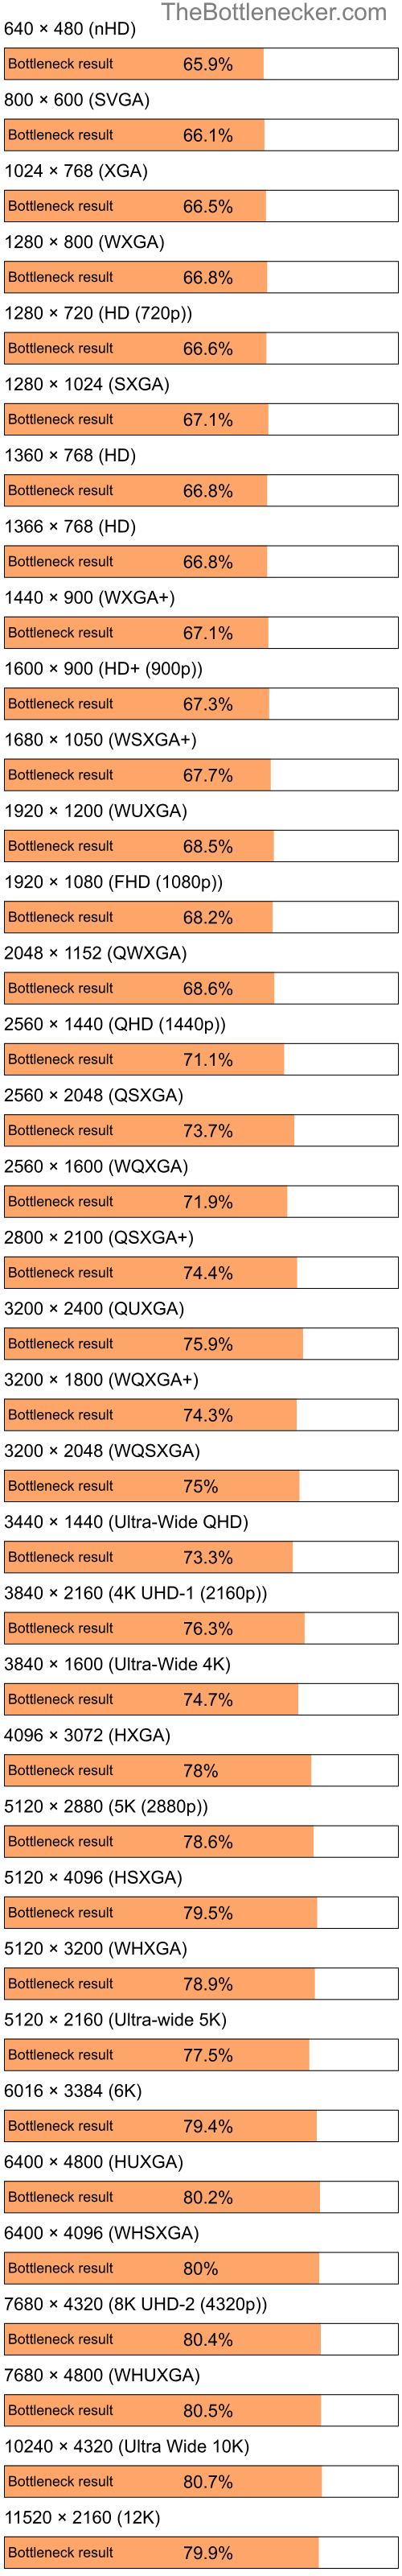 Bottleneck results by resolution for Intel Celeron and AMD Mobility Radeon X700 in General Tasks